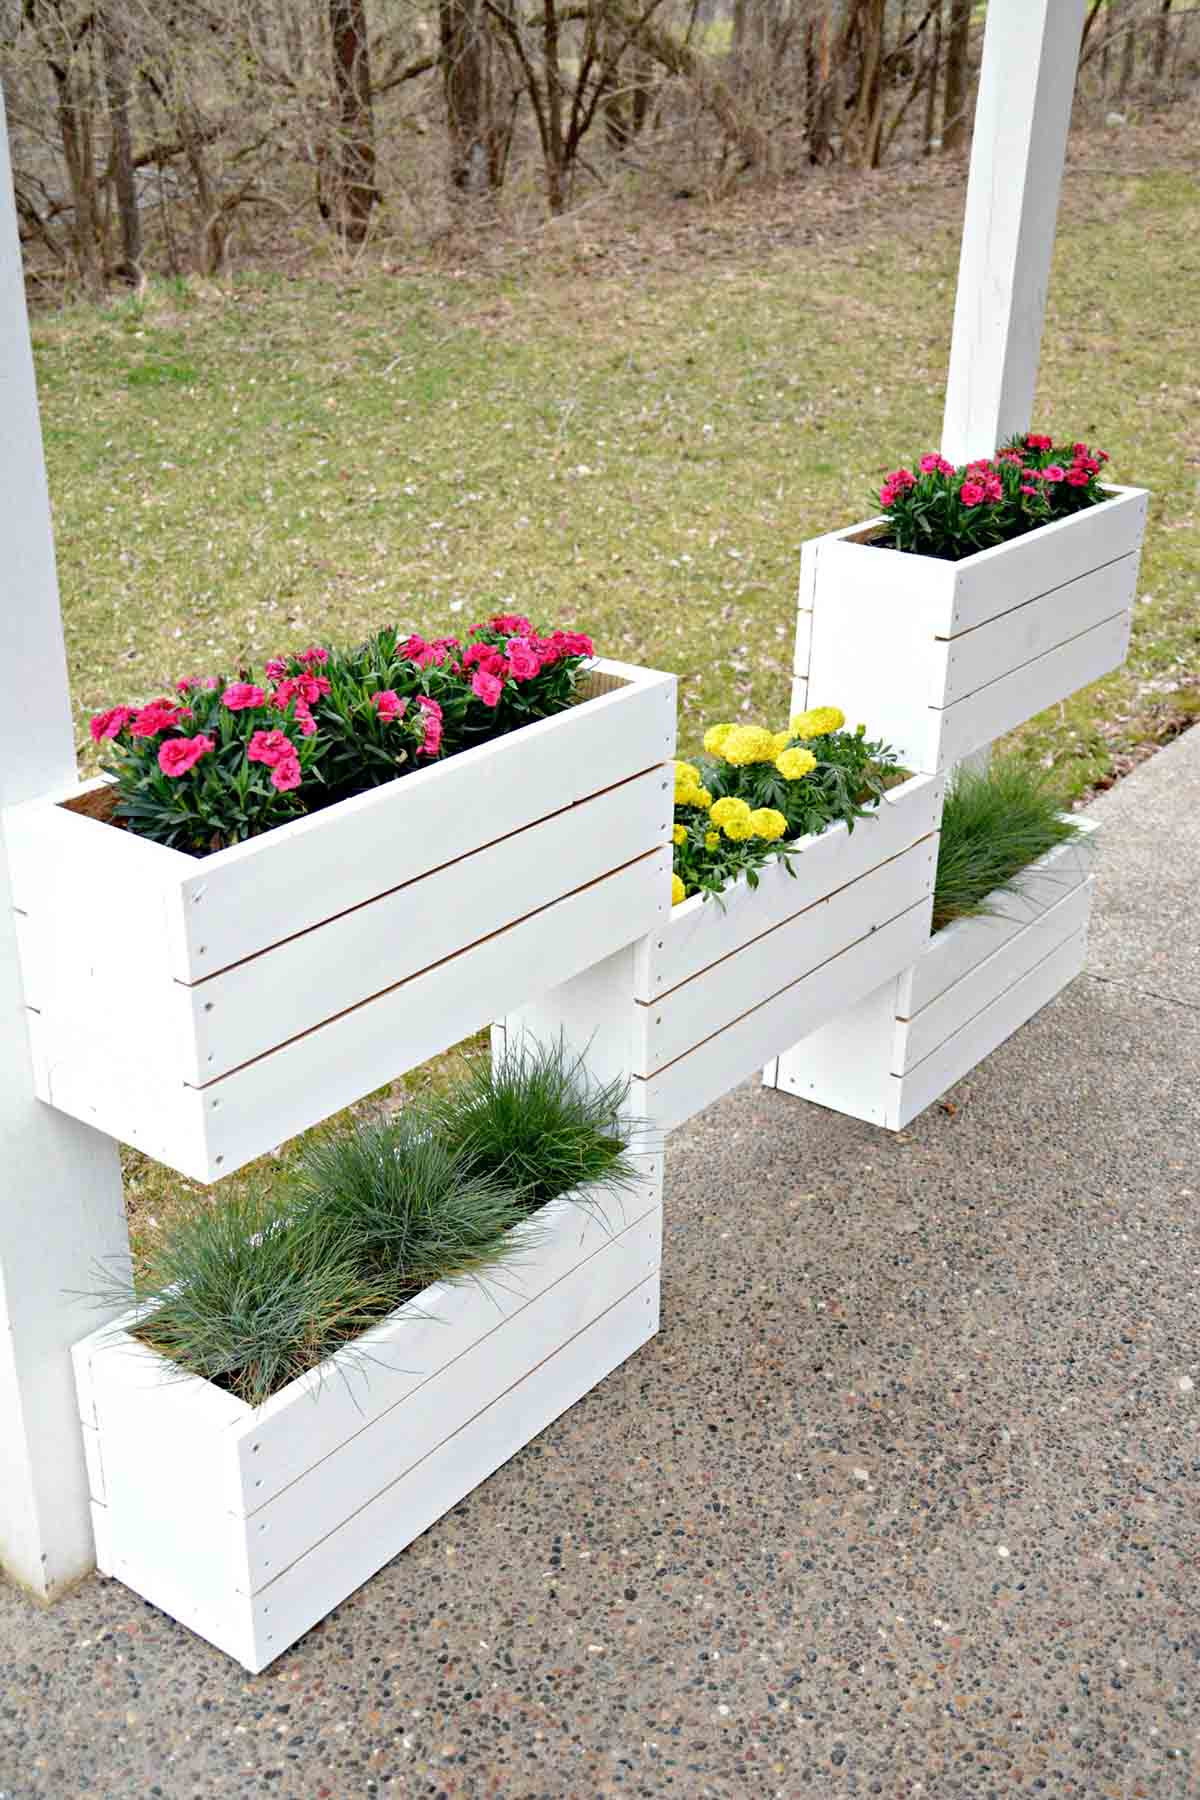 DIY Wood Flower Boxes
 32 Best DIY Pallet and Wood Planter Box Ideas and Designs